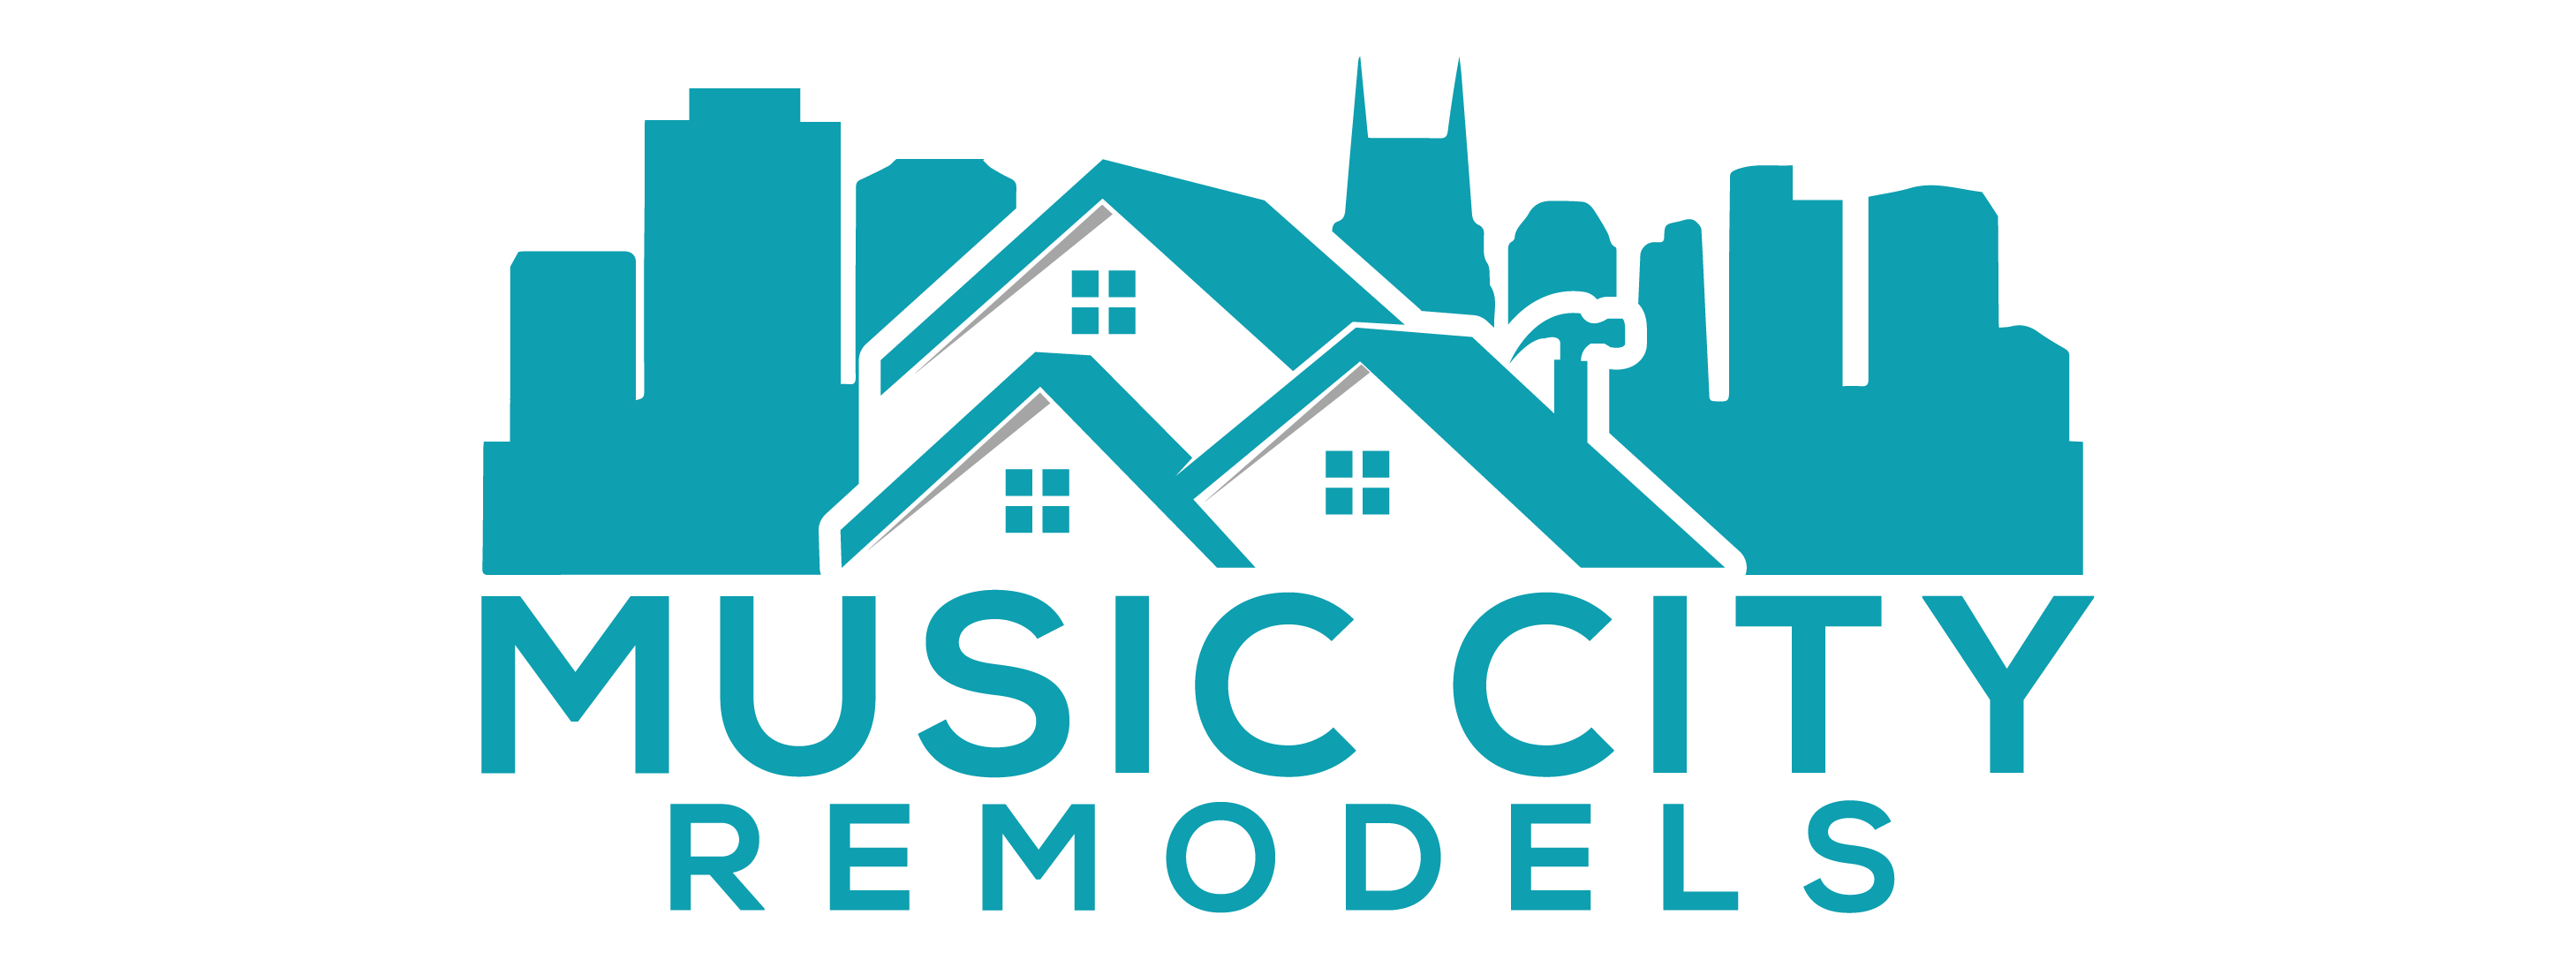 Music City Remodels Home Remodeling Contractor Nashville TN